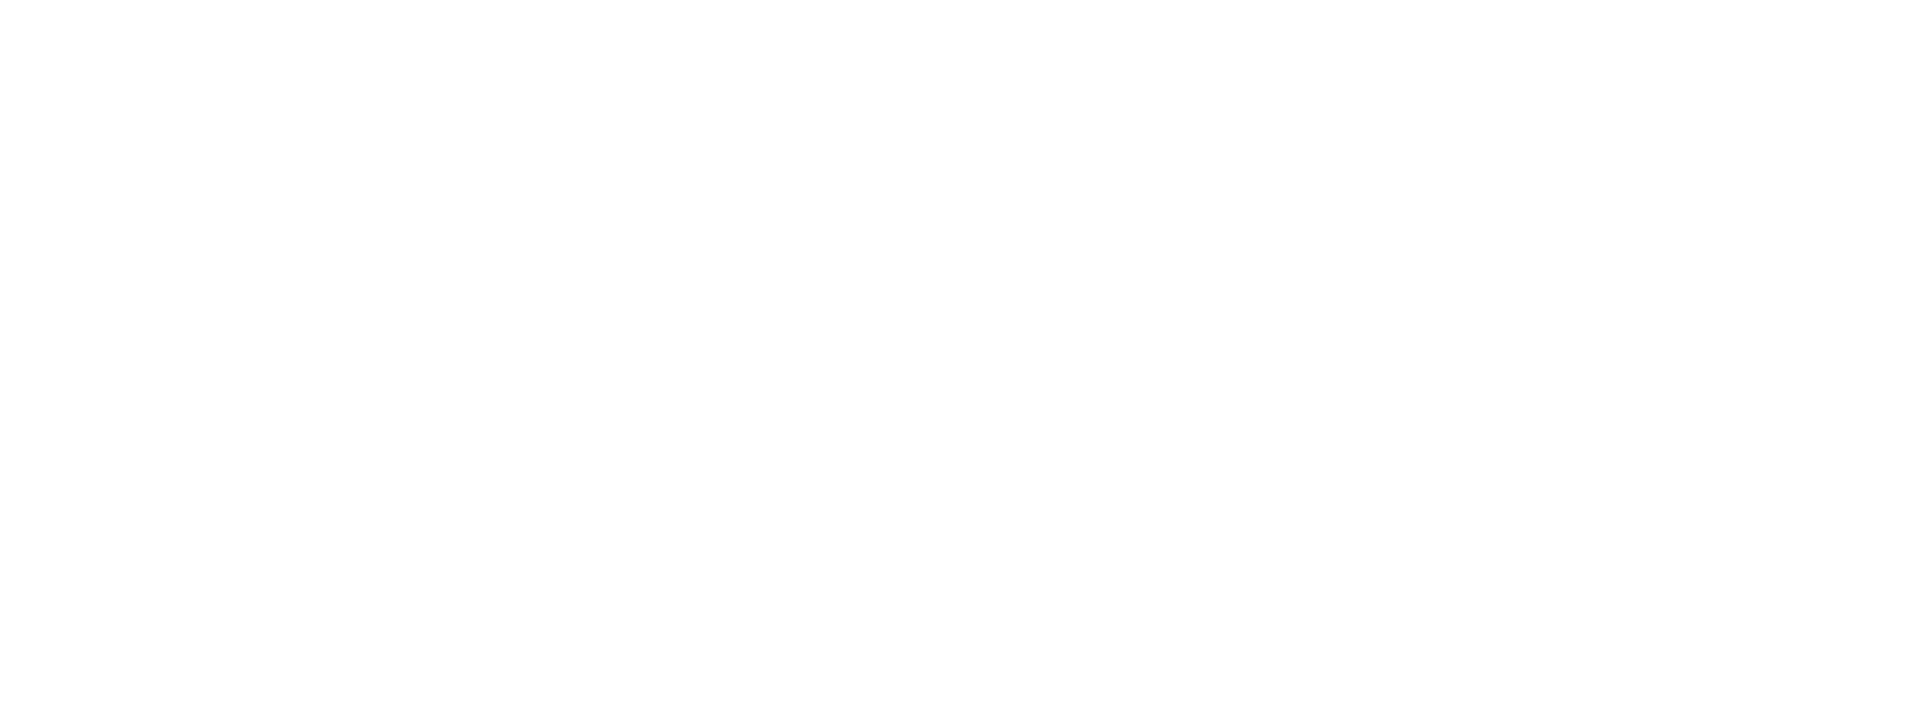 Anthony Carrino's Firehouse Deck